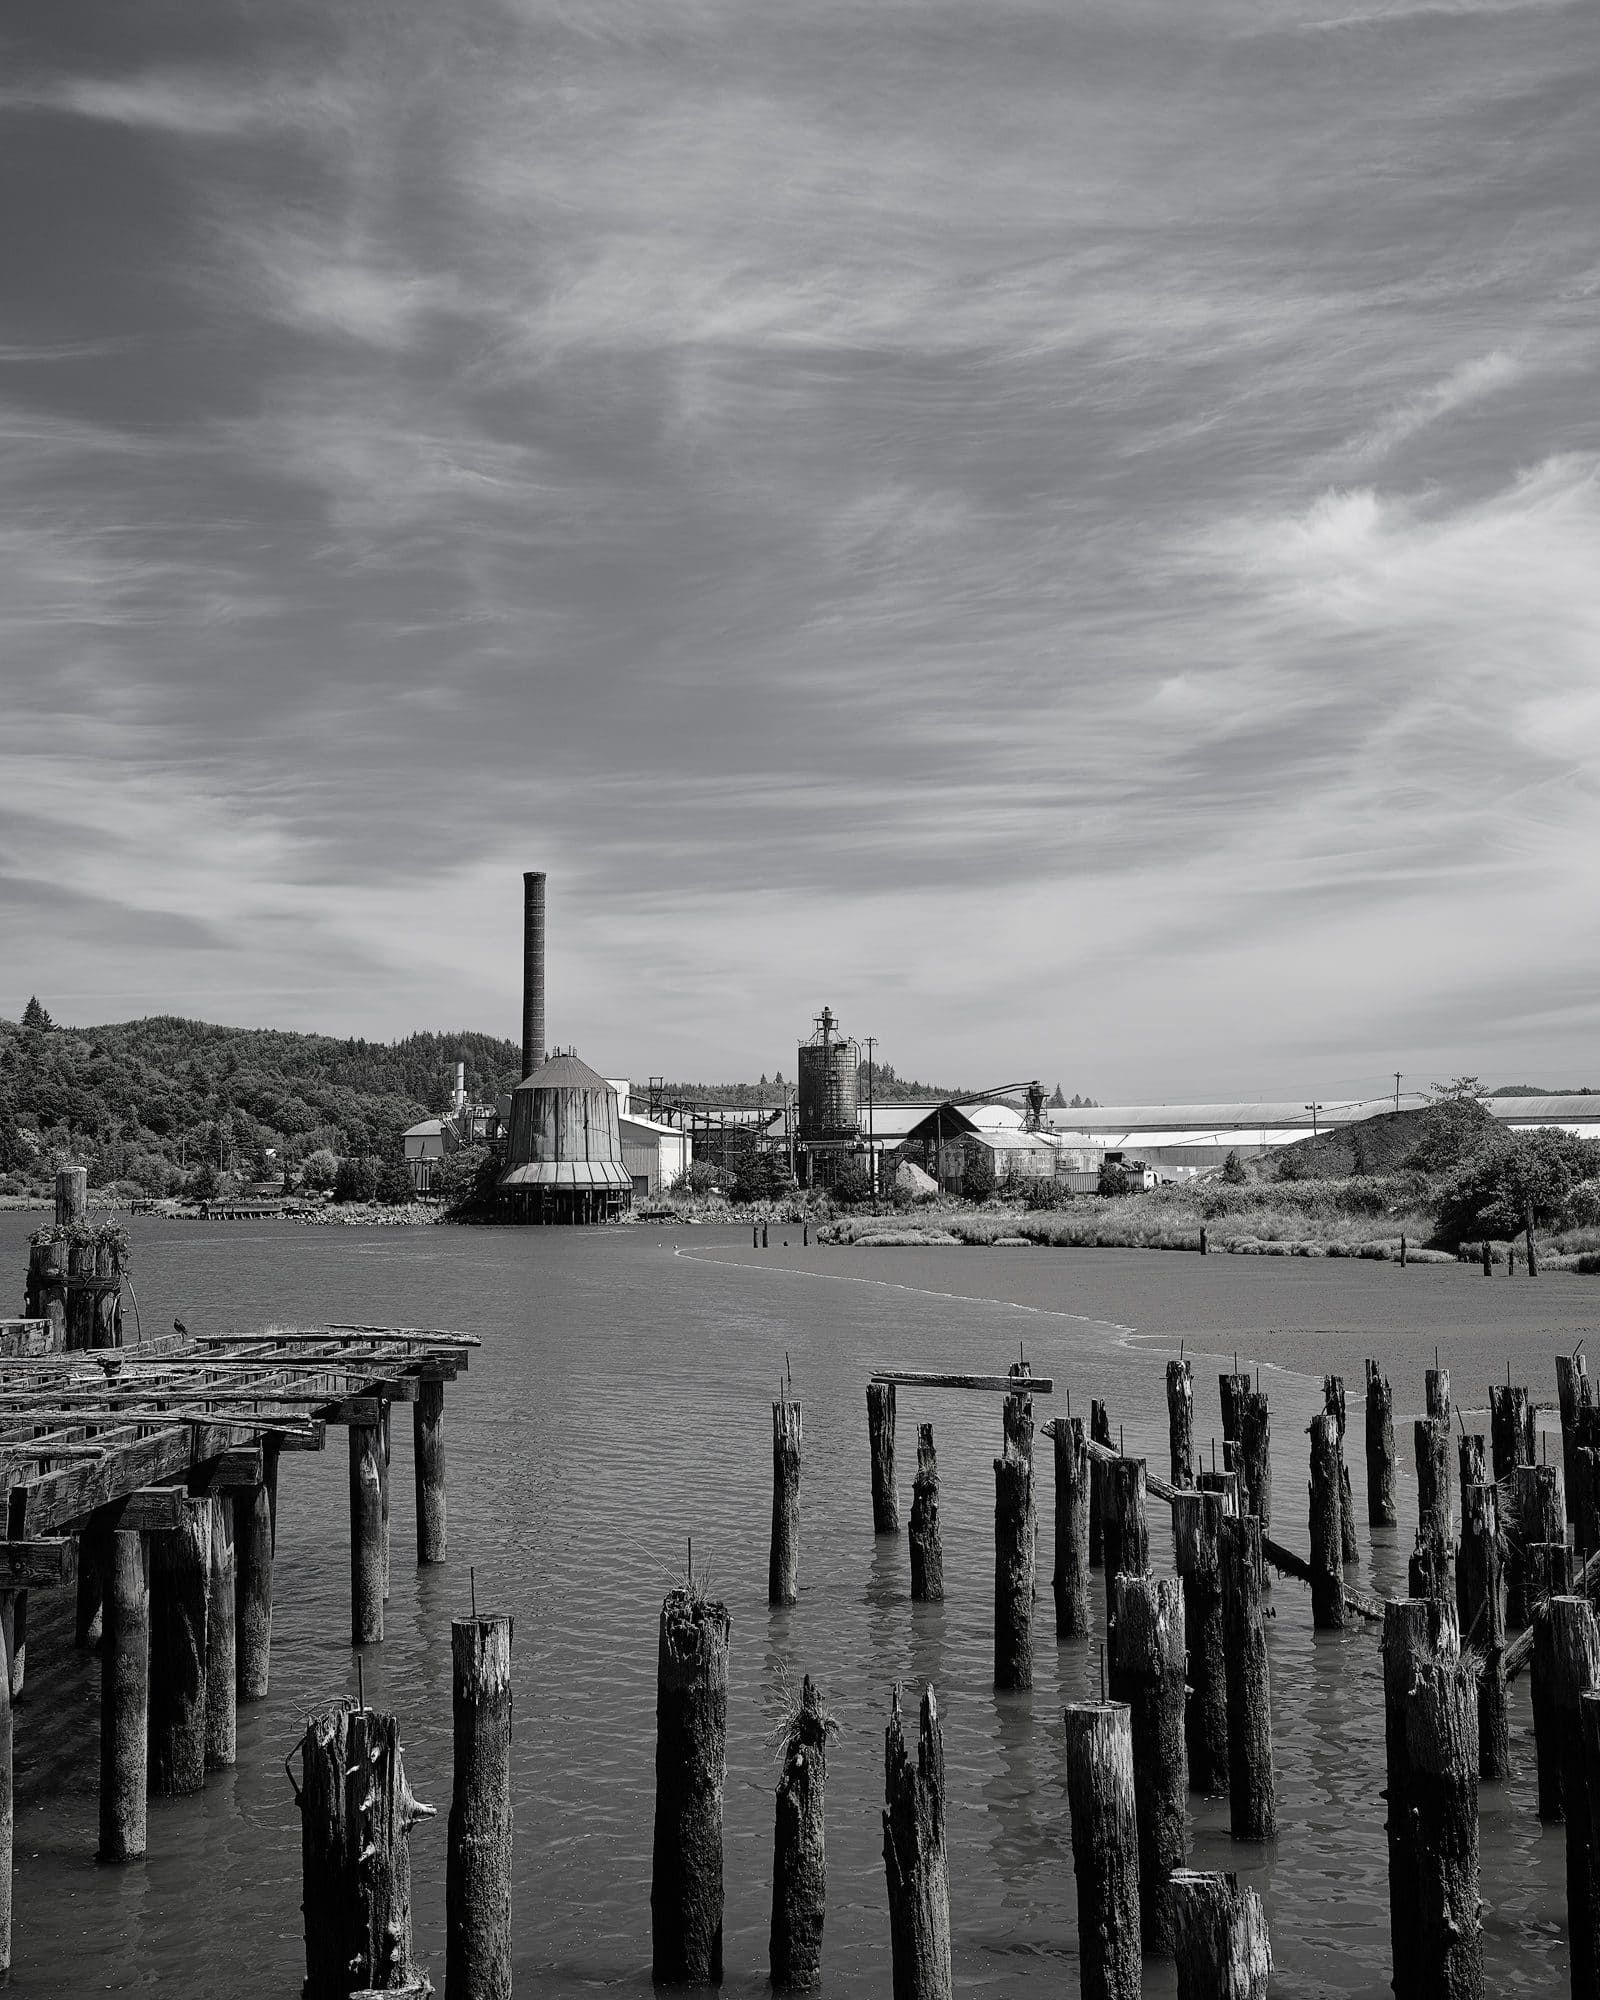 A black and white photograph of the Weyerhaeuser Mill along the Willapa River in Raymond, Washington.